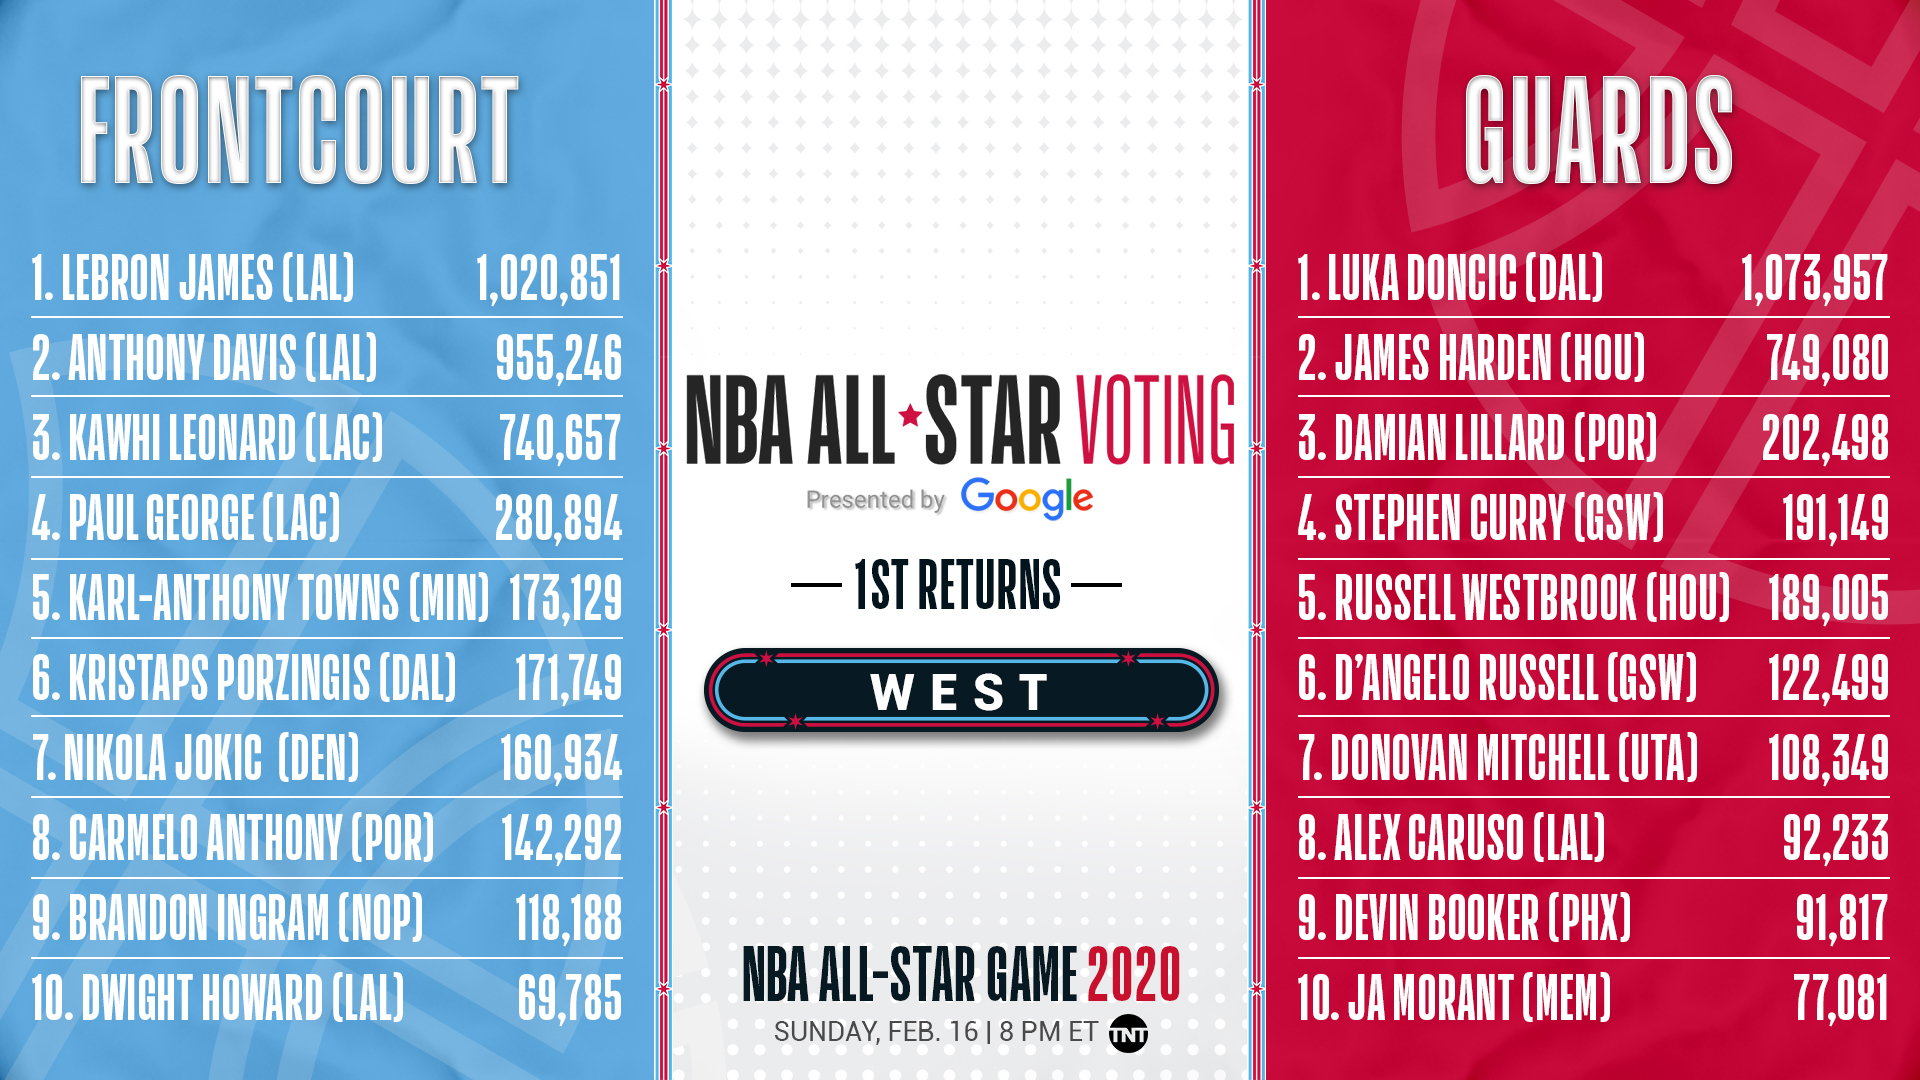 Nba All Star Game Voting Leaders